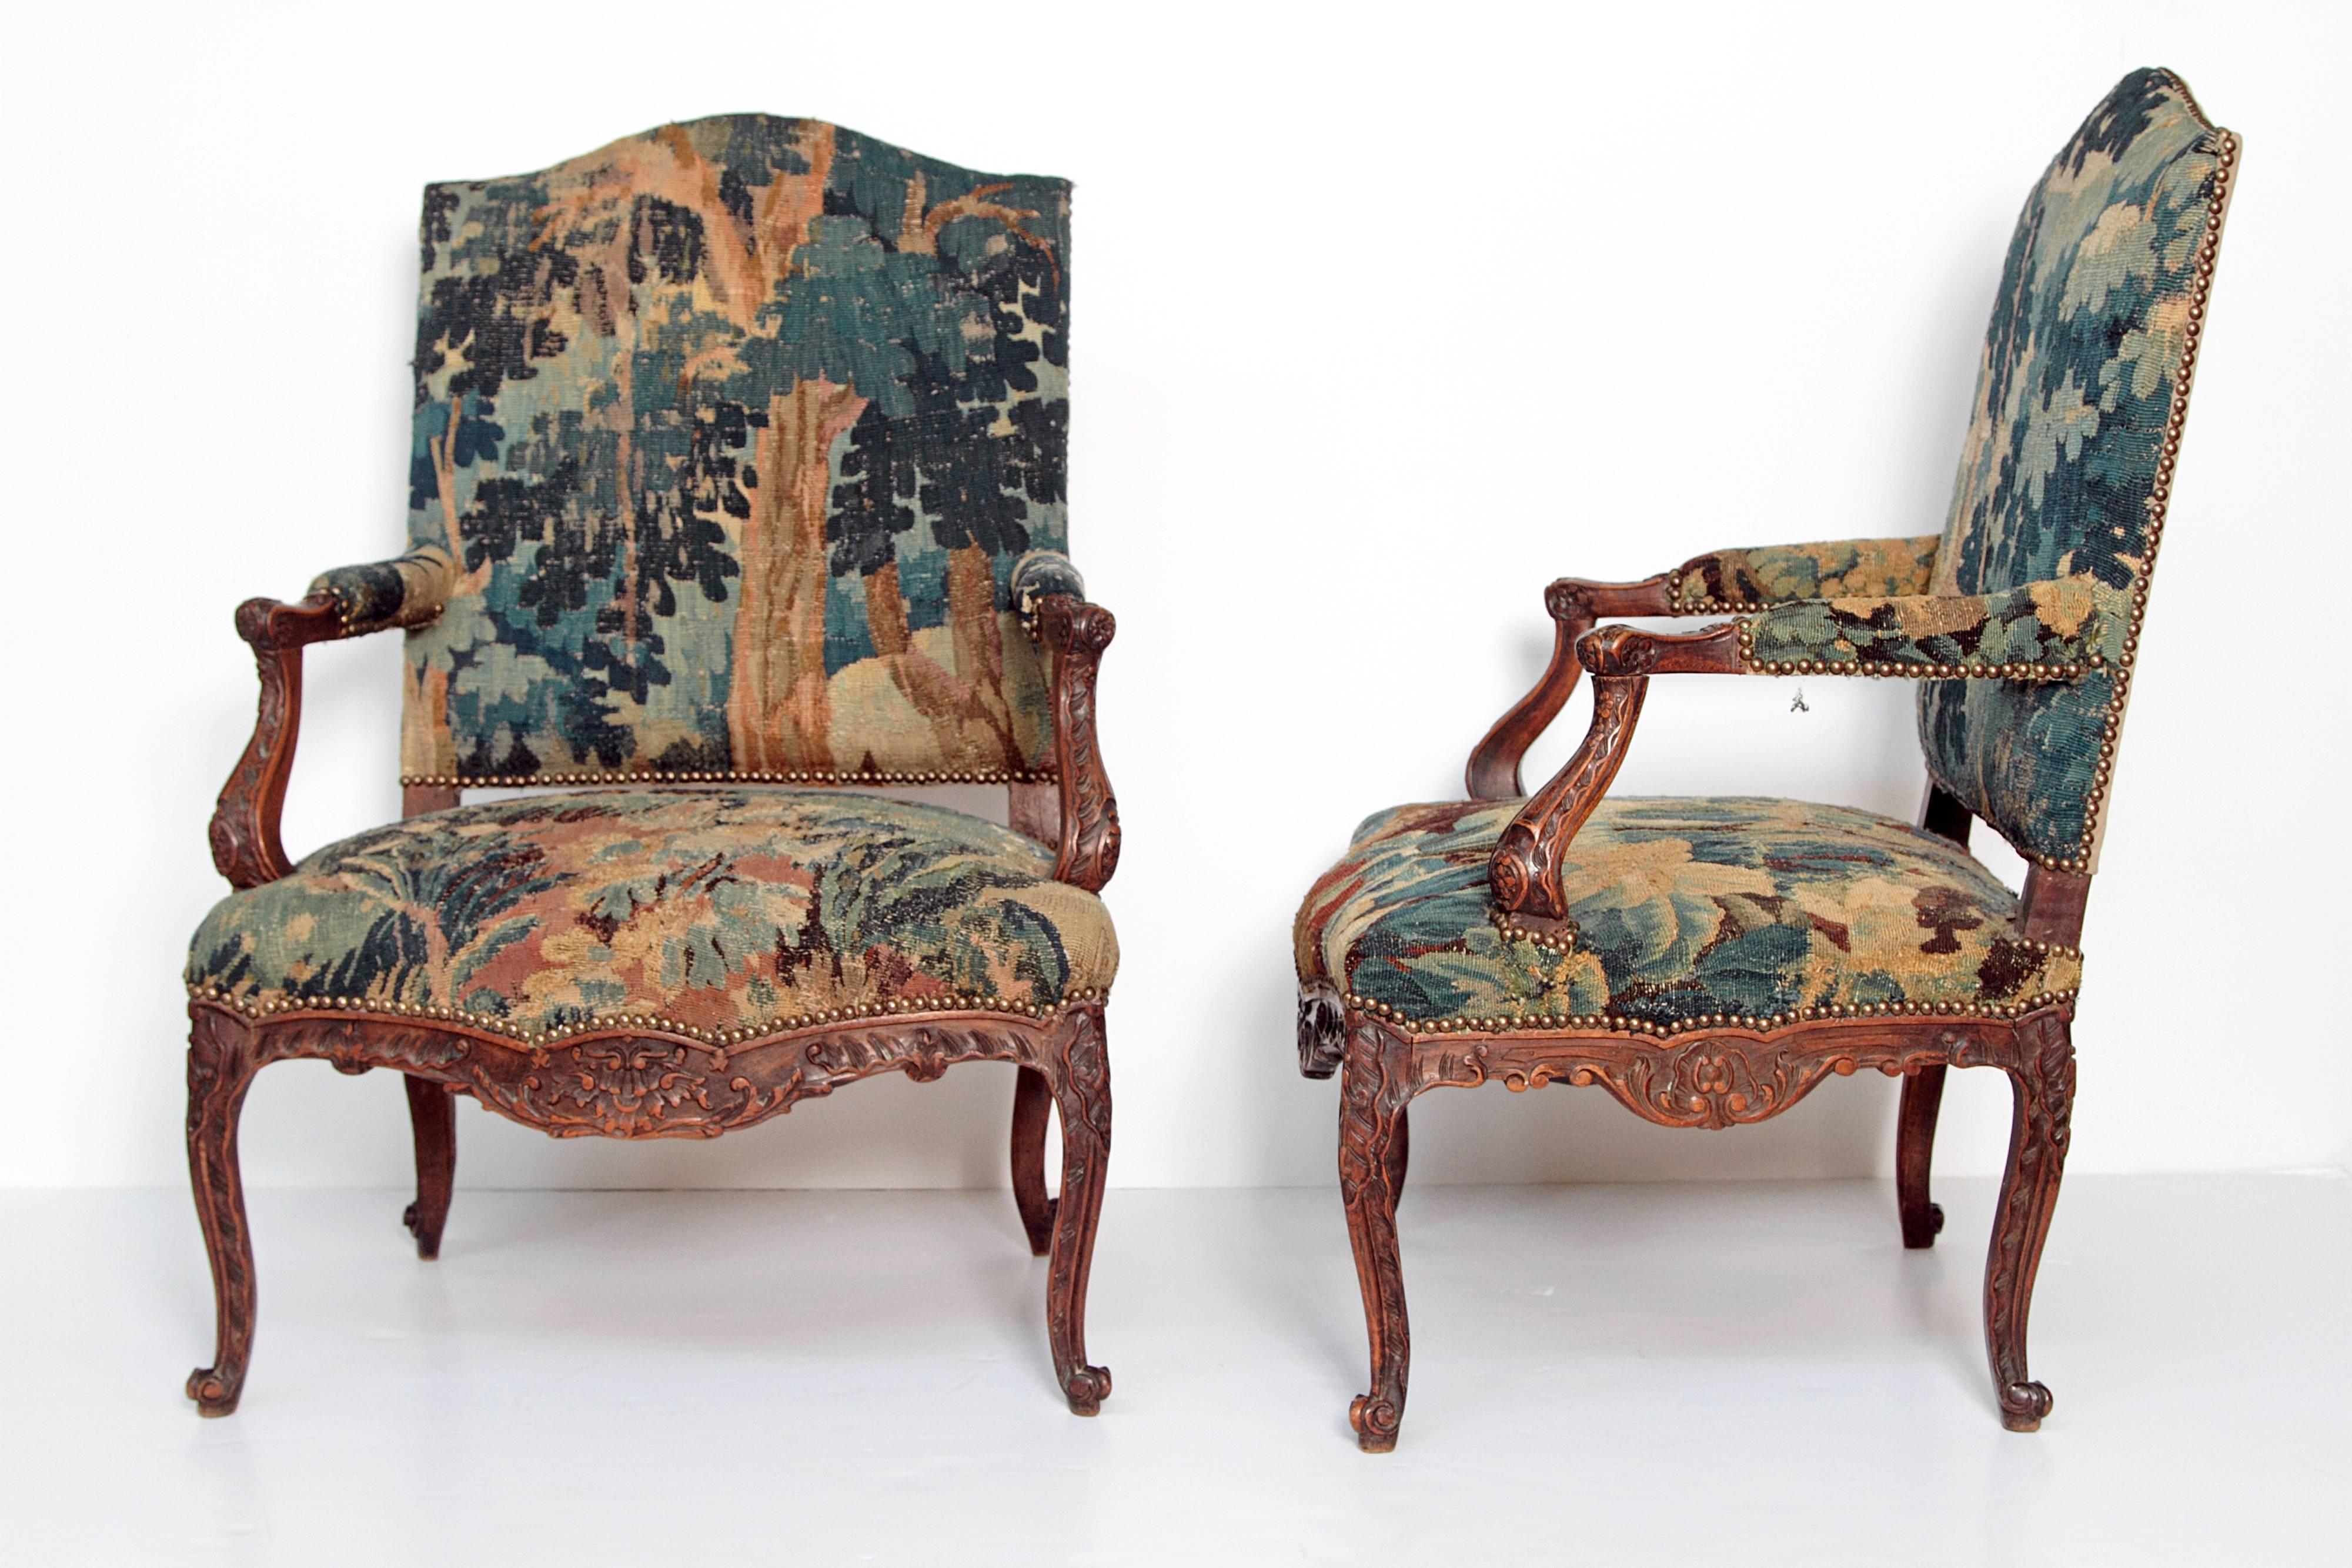 A generously proportioned pair of mid-18th century, Louis XV, hand-carved walnut armchairs with 18th century tapestry upholstery, shades of green with blue, brown, gold, and tan (leafy forest or foliate), nail head trim, chair back is upholstered in